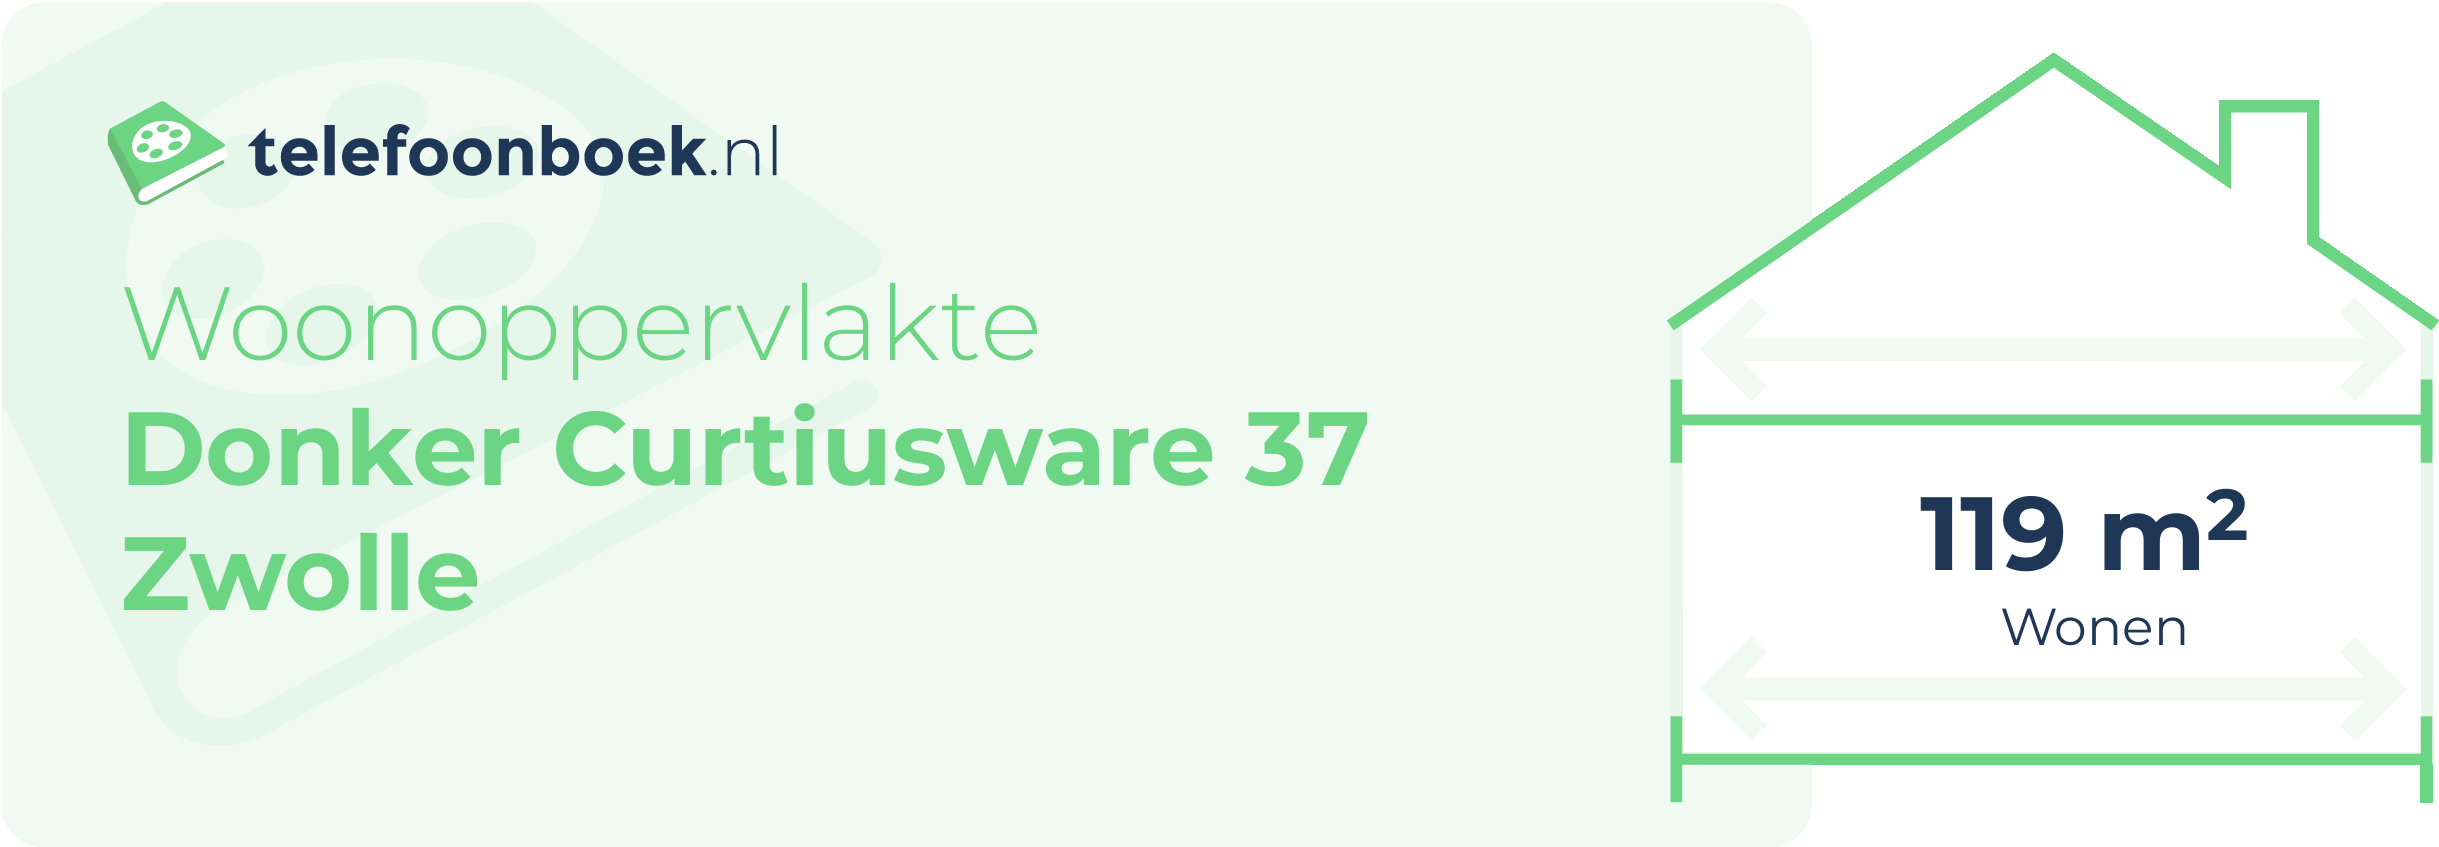 Woonoppervlakte Donker Curtiusware 37 Zwolle